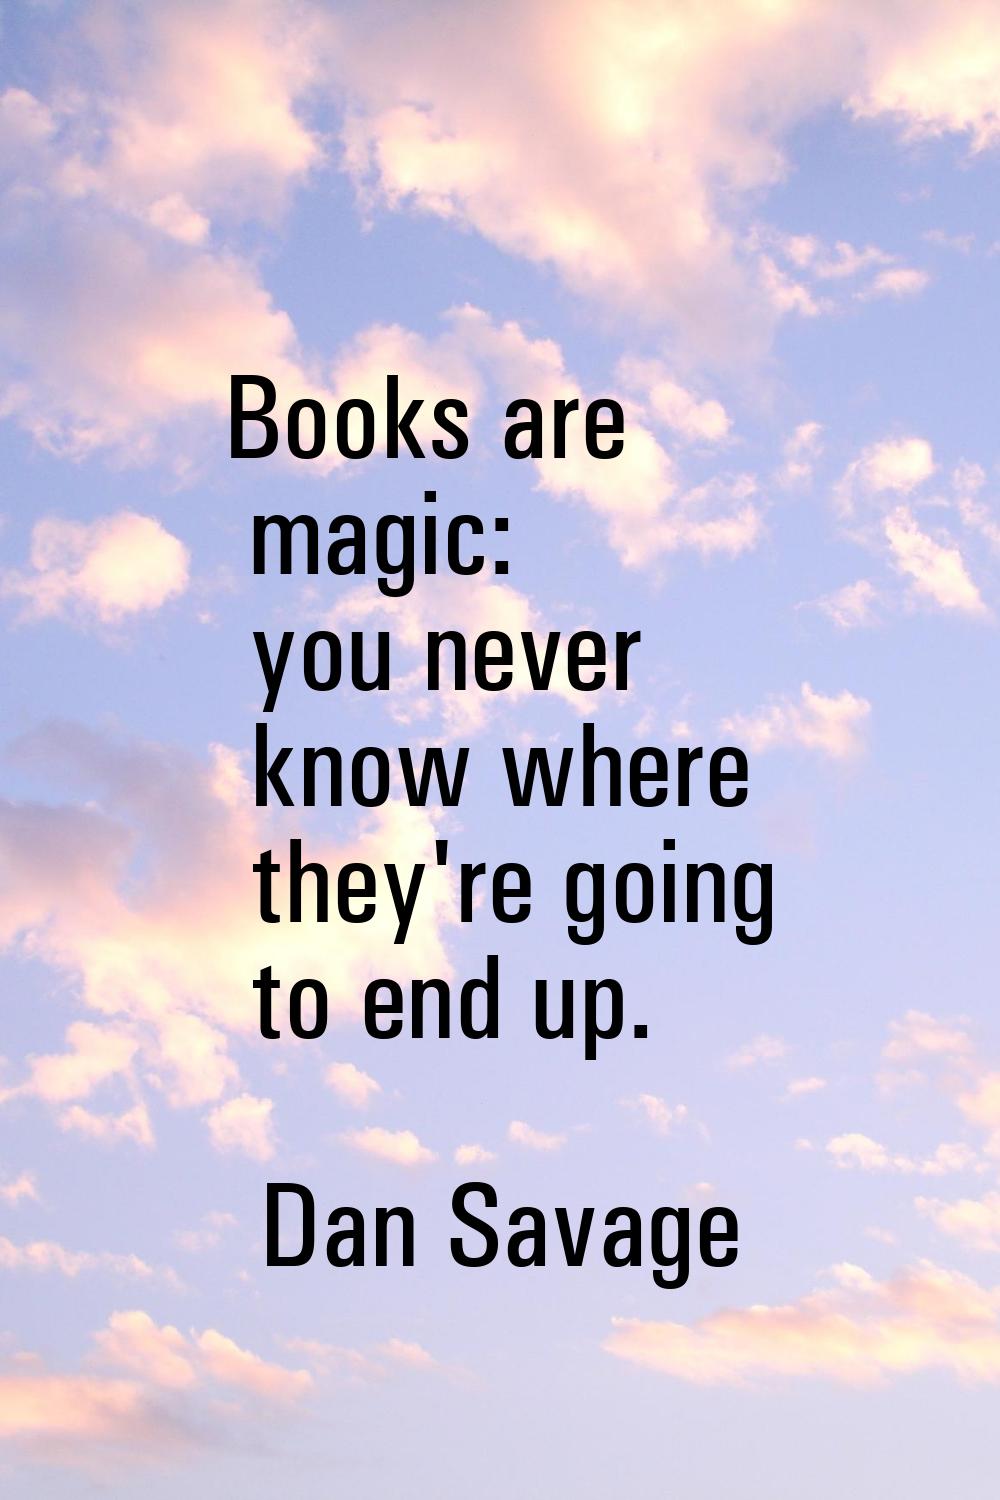 Books are magic: you never know where they're going to end up.